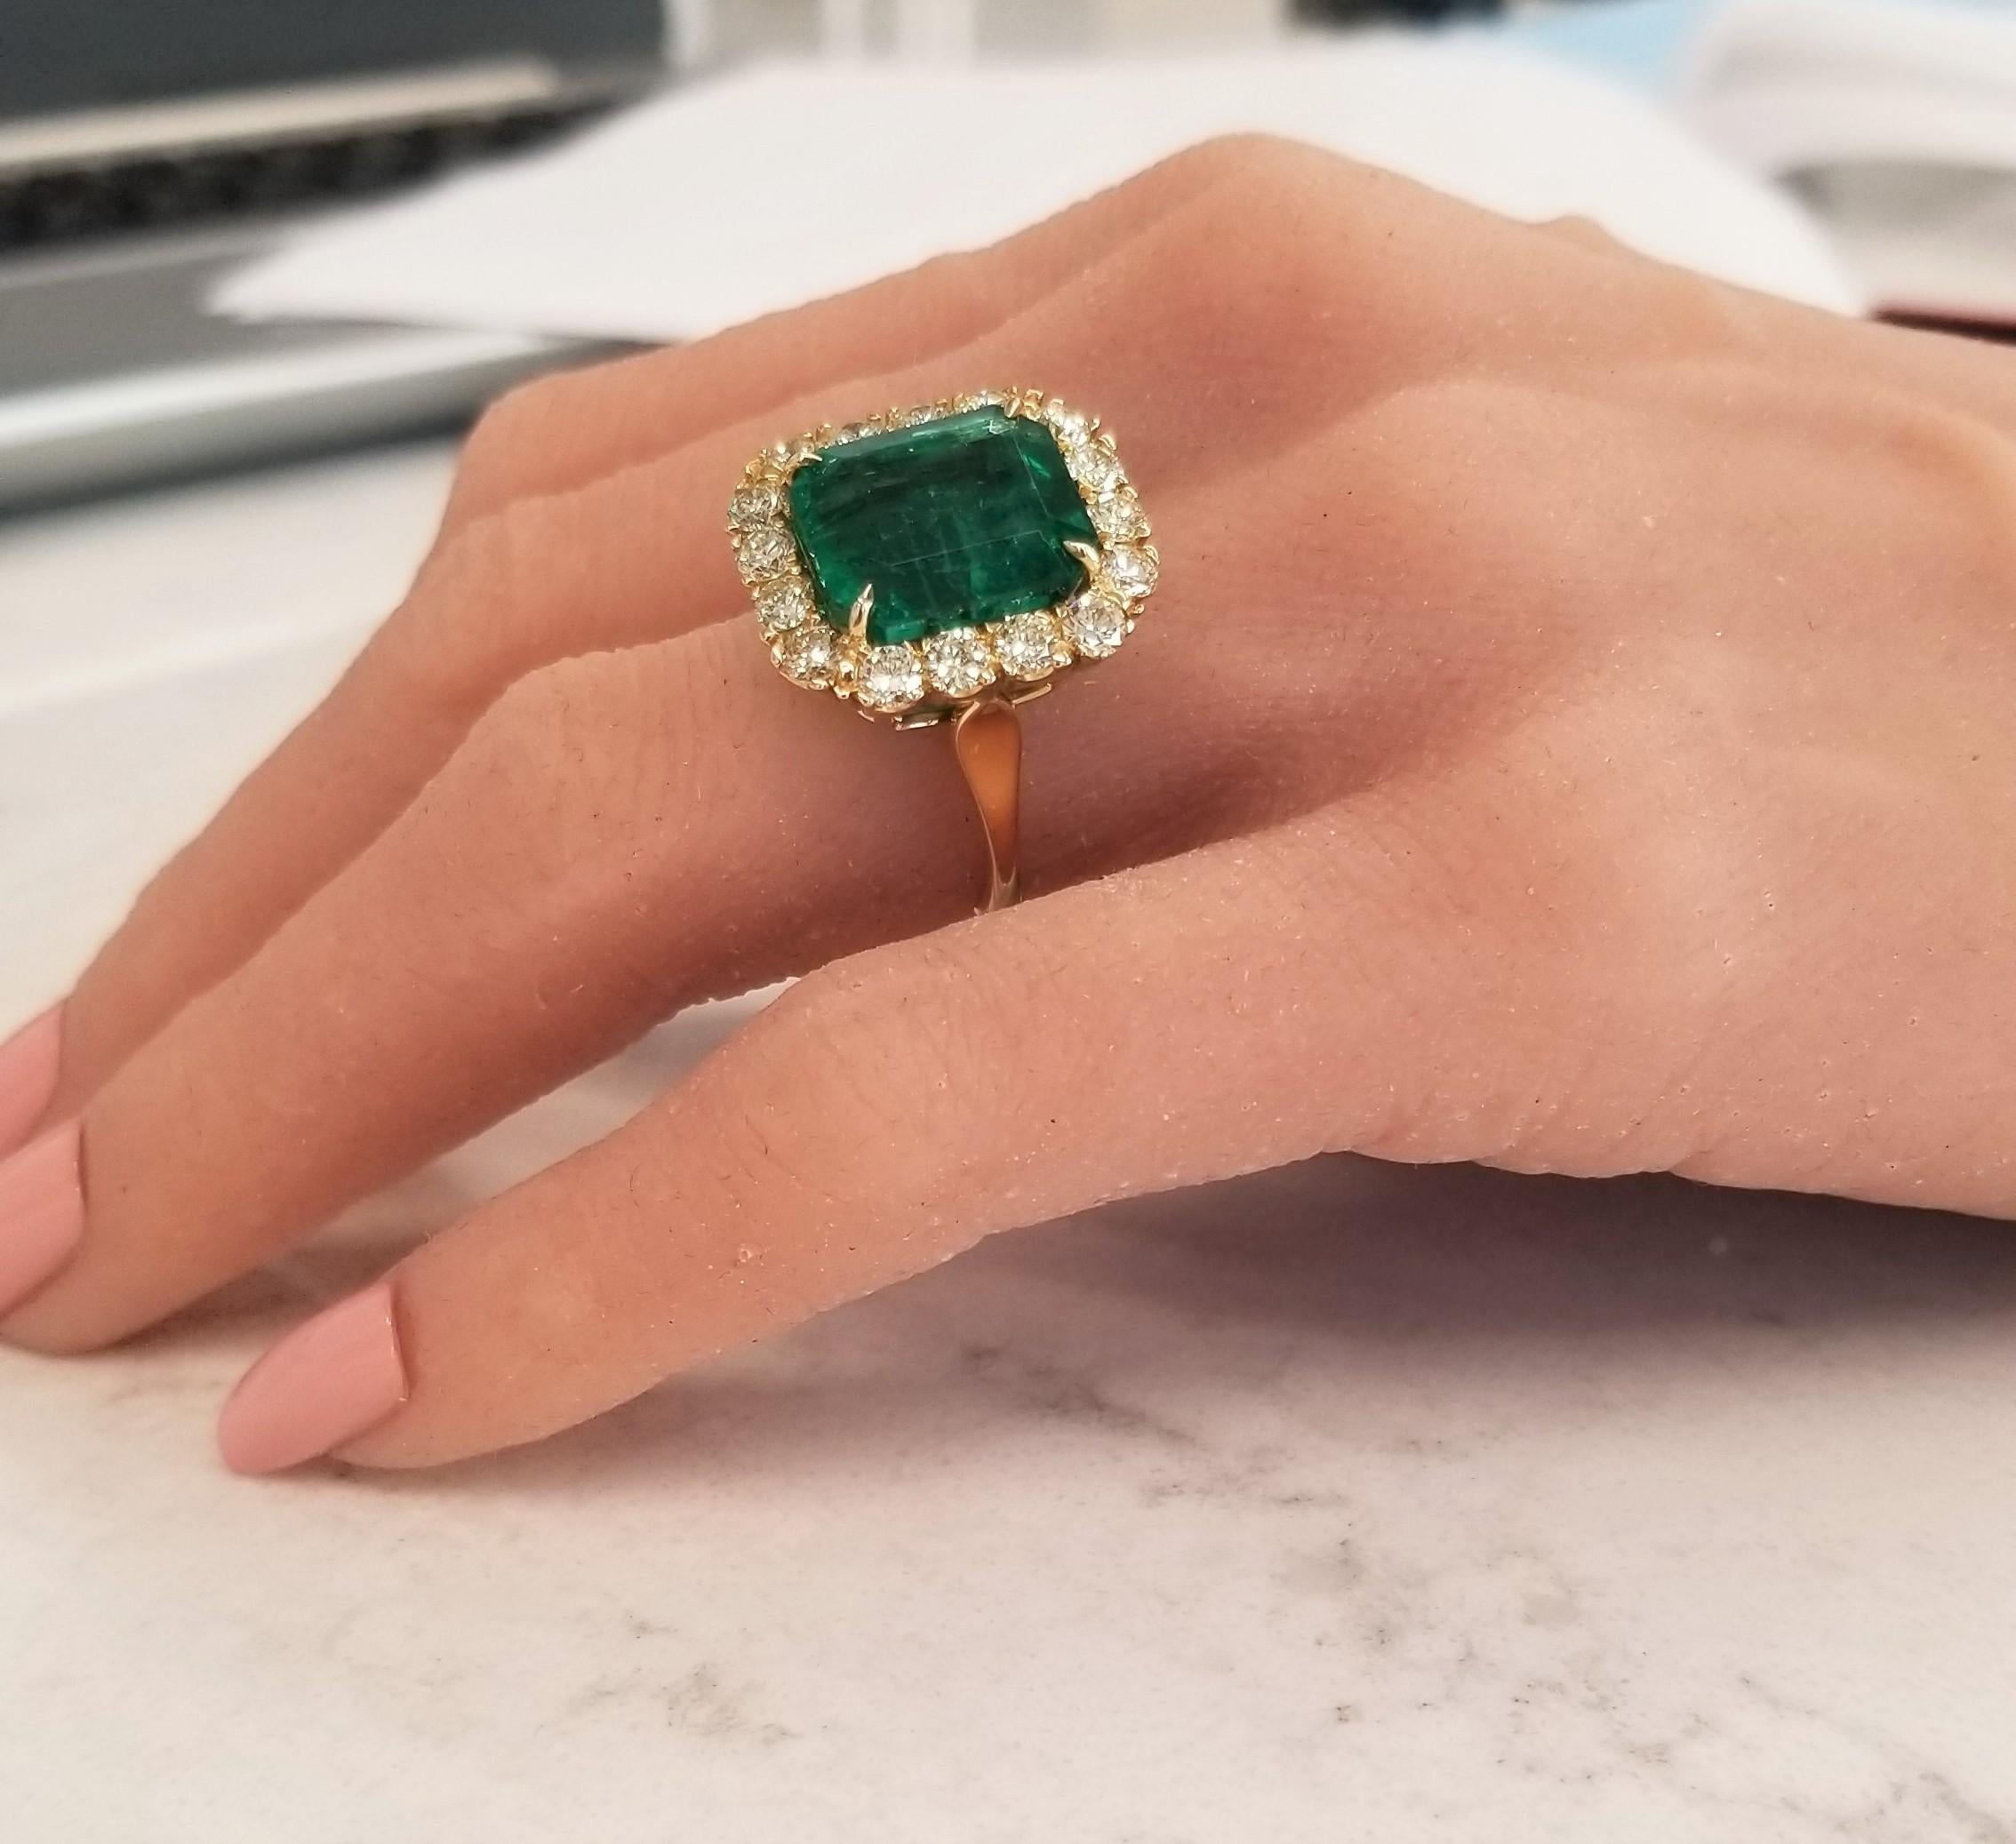 This is an incomparable emerald and diamond ring. This stunning example showcases a 11.53 carat emerald cut Emerald; it exhibits excellent luster and transparency. It measures 13.57 x 11.93 mm. Framed in an elegant halo of 1.73 carats of fancy light